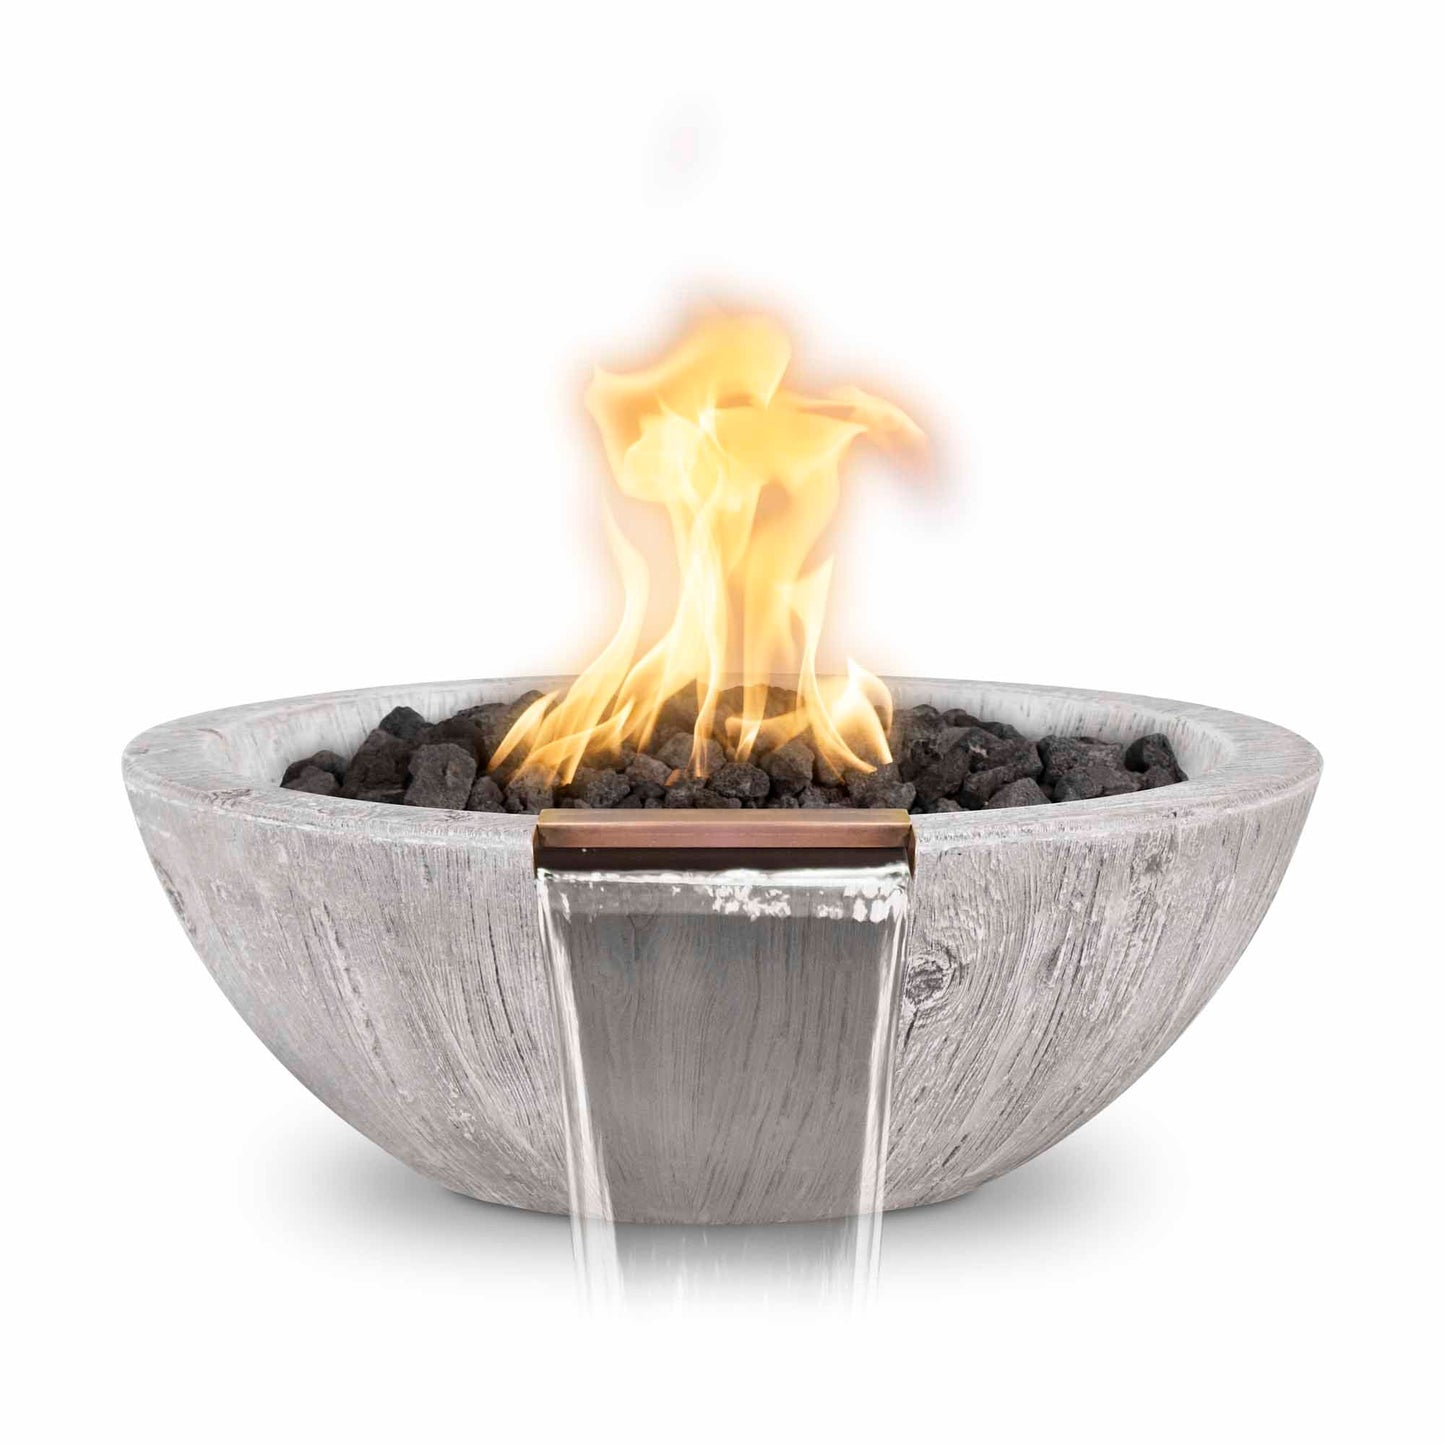 The Outdoor Plus Round Sedona 27" Ivory Wood Grain Liquid Propane Fire & Water Bowl with Match Lit with Flame Sense Ignition